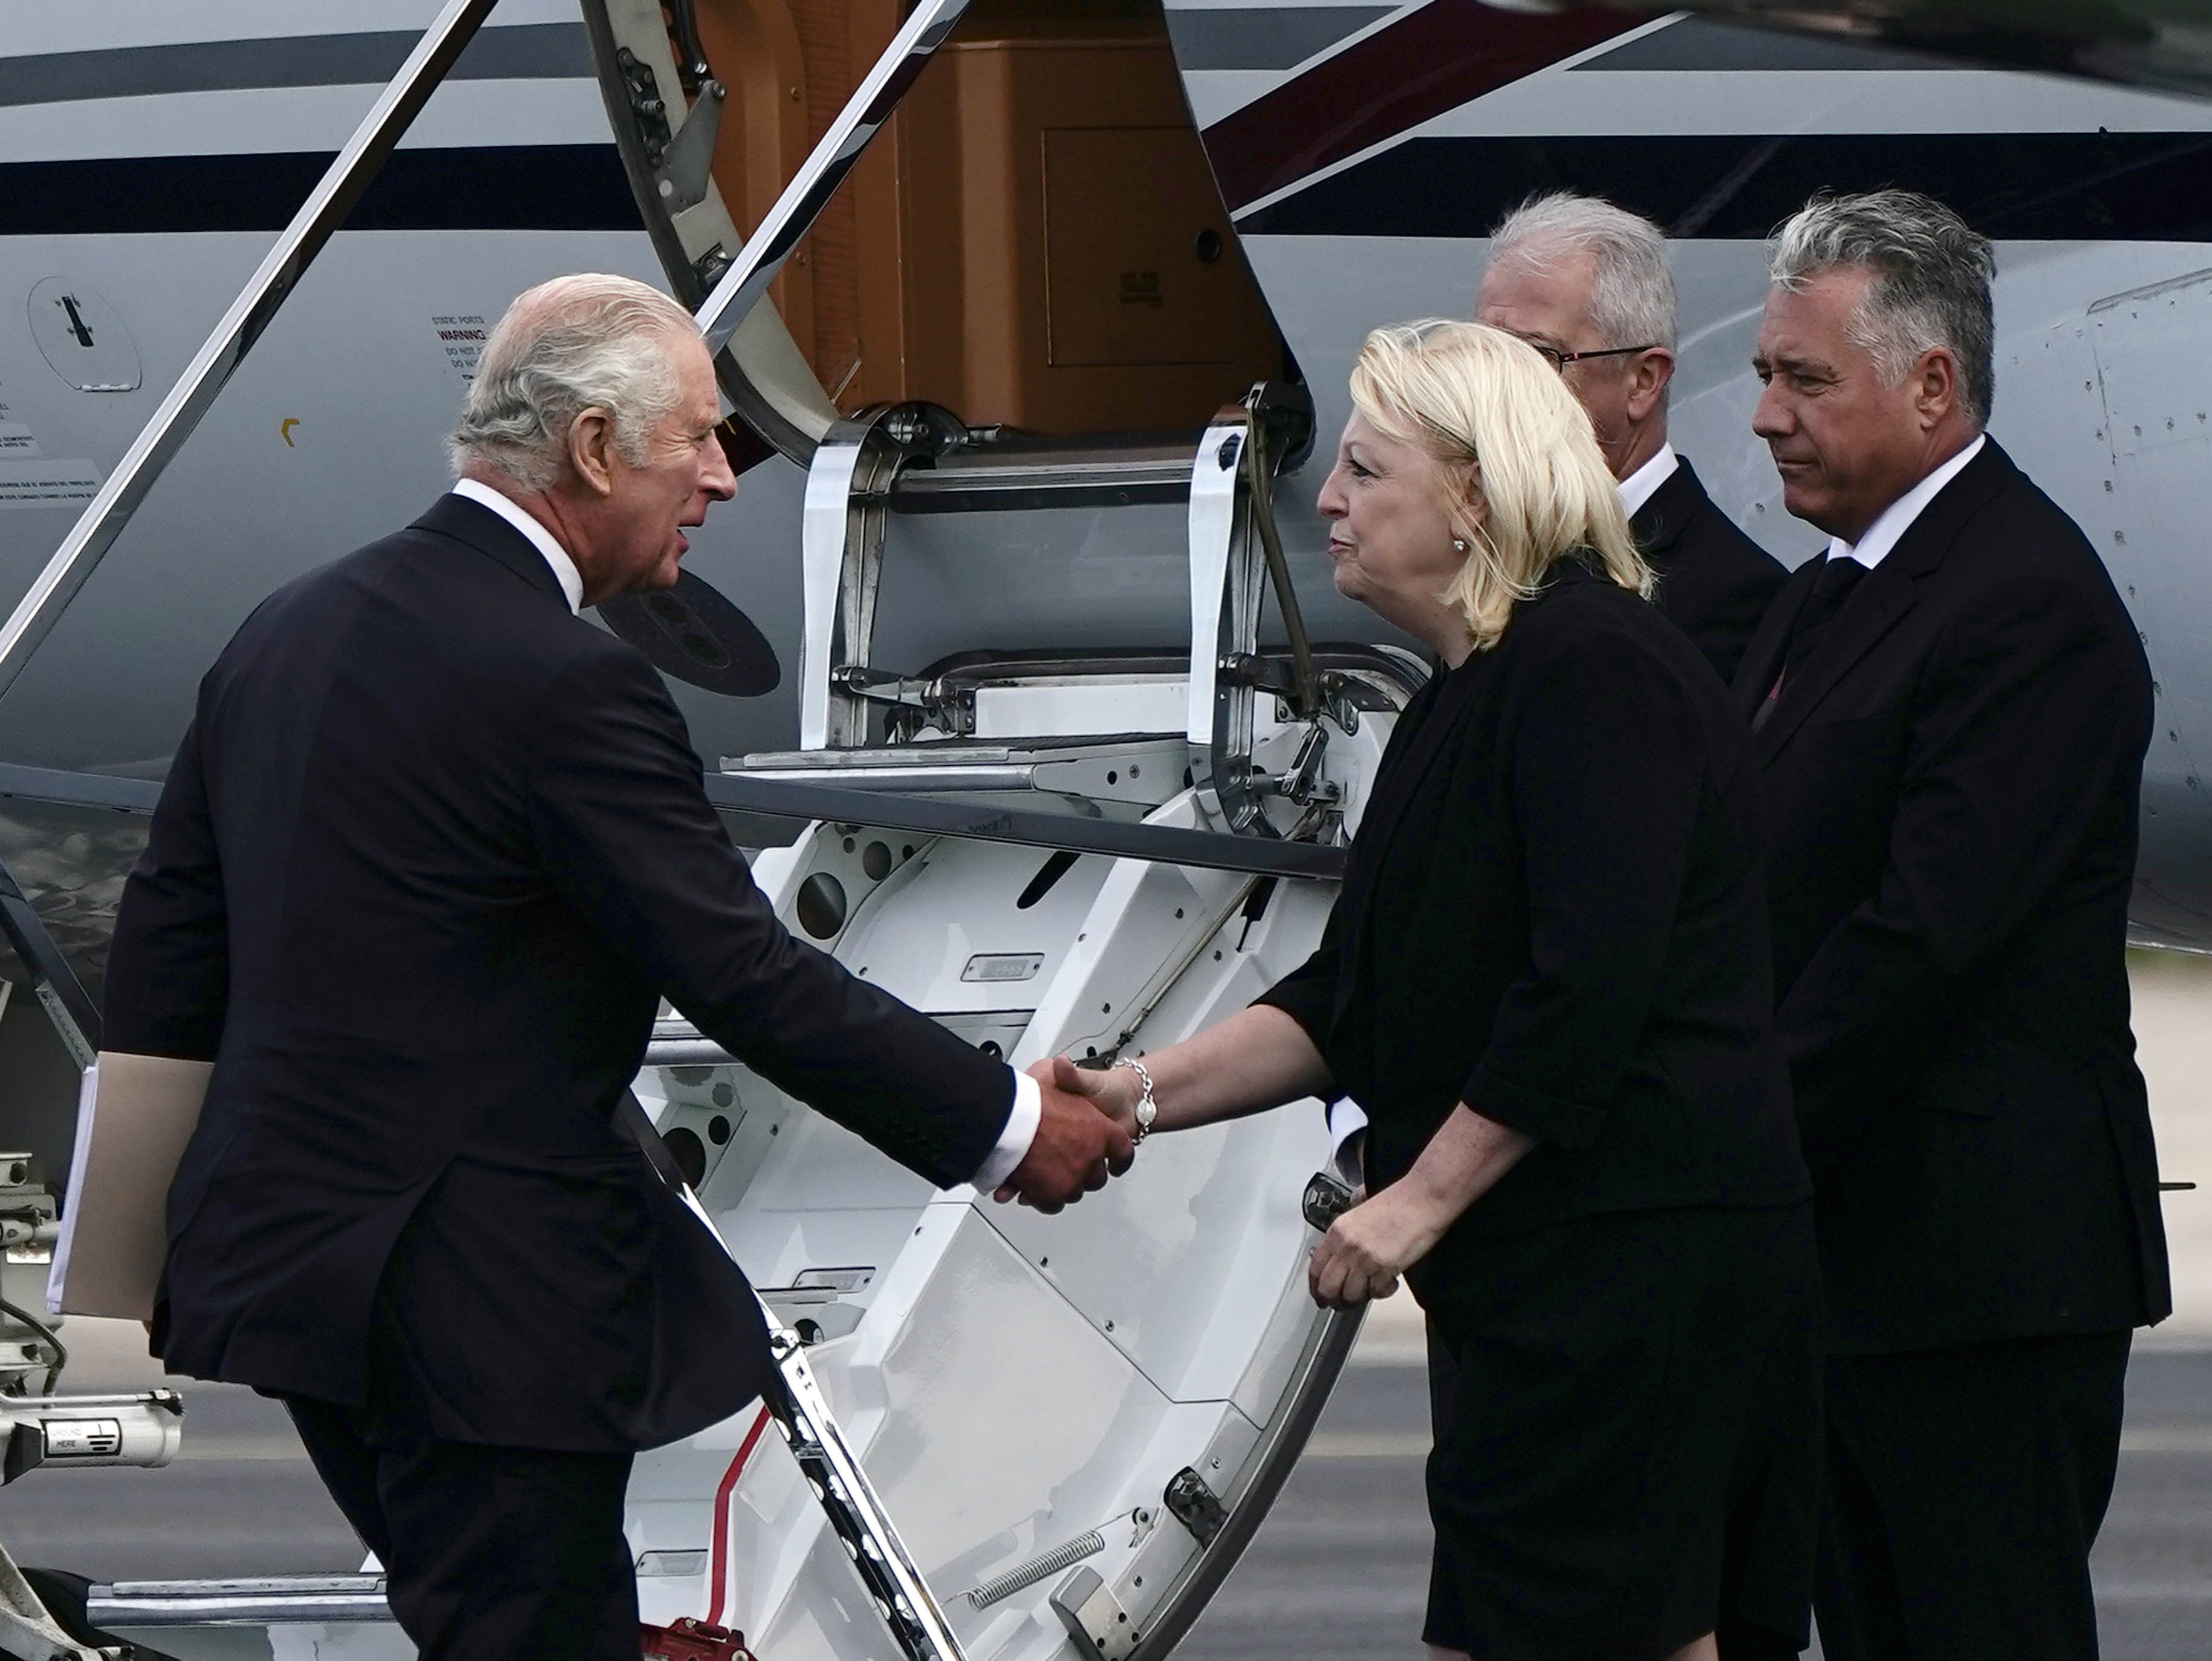 King Charles III stopped to shake hands and speak with three people waiting beside a plane before climbing on board